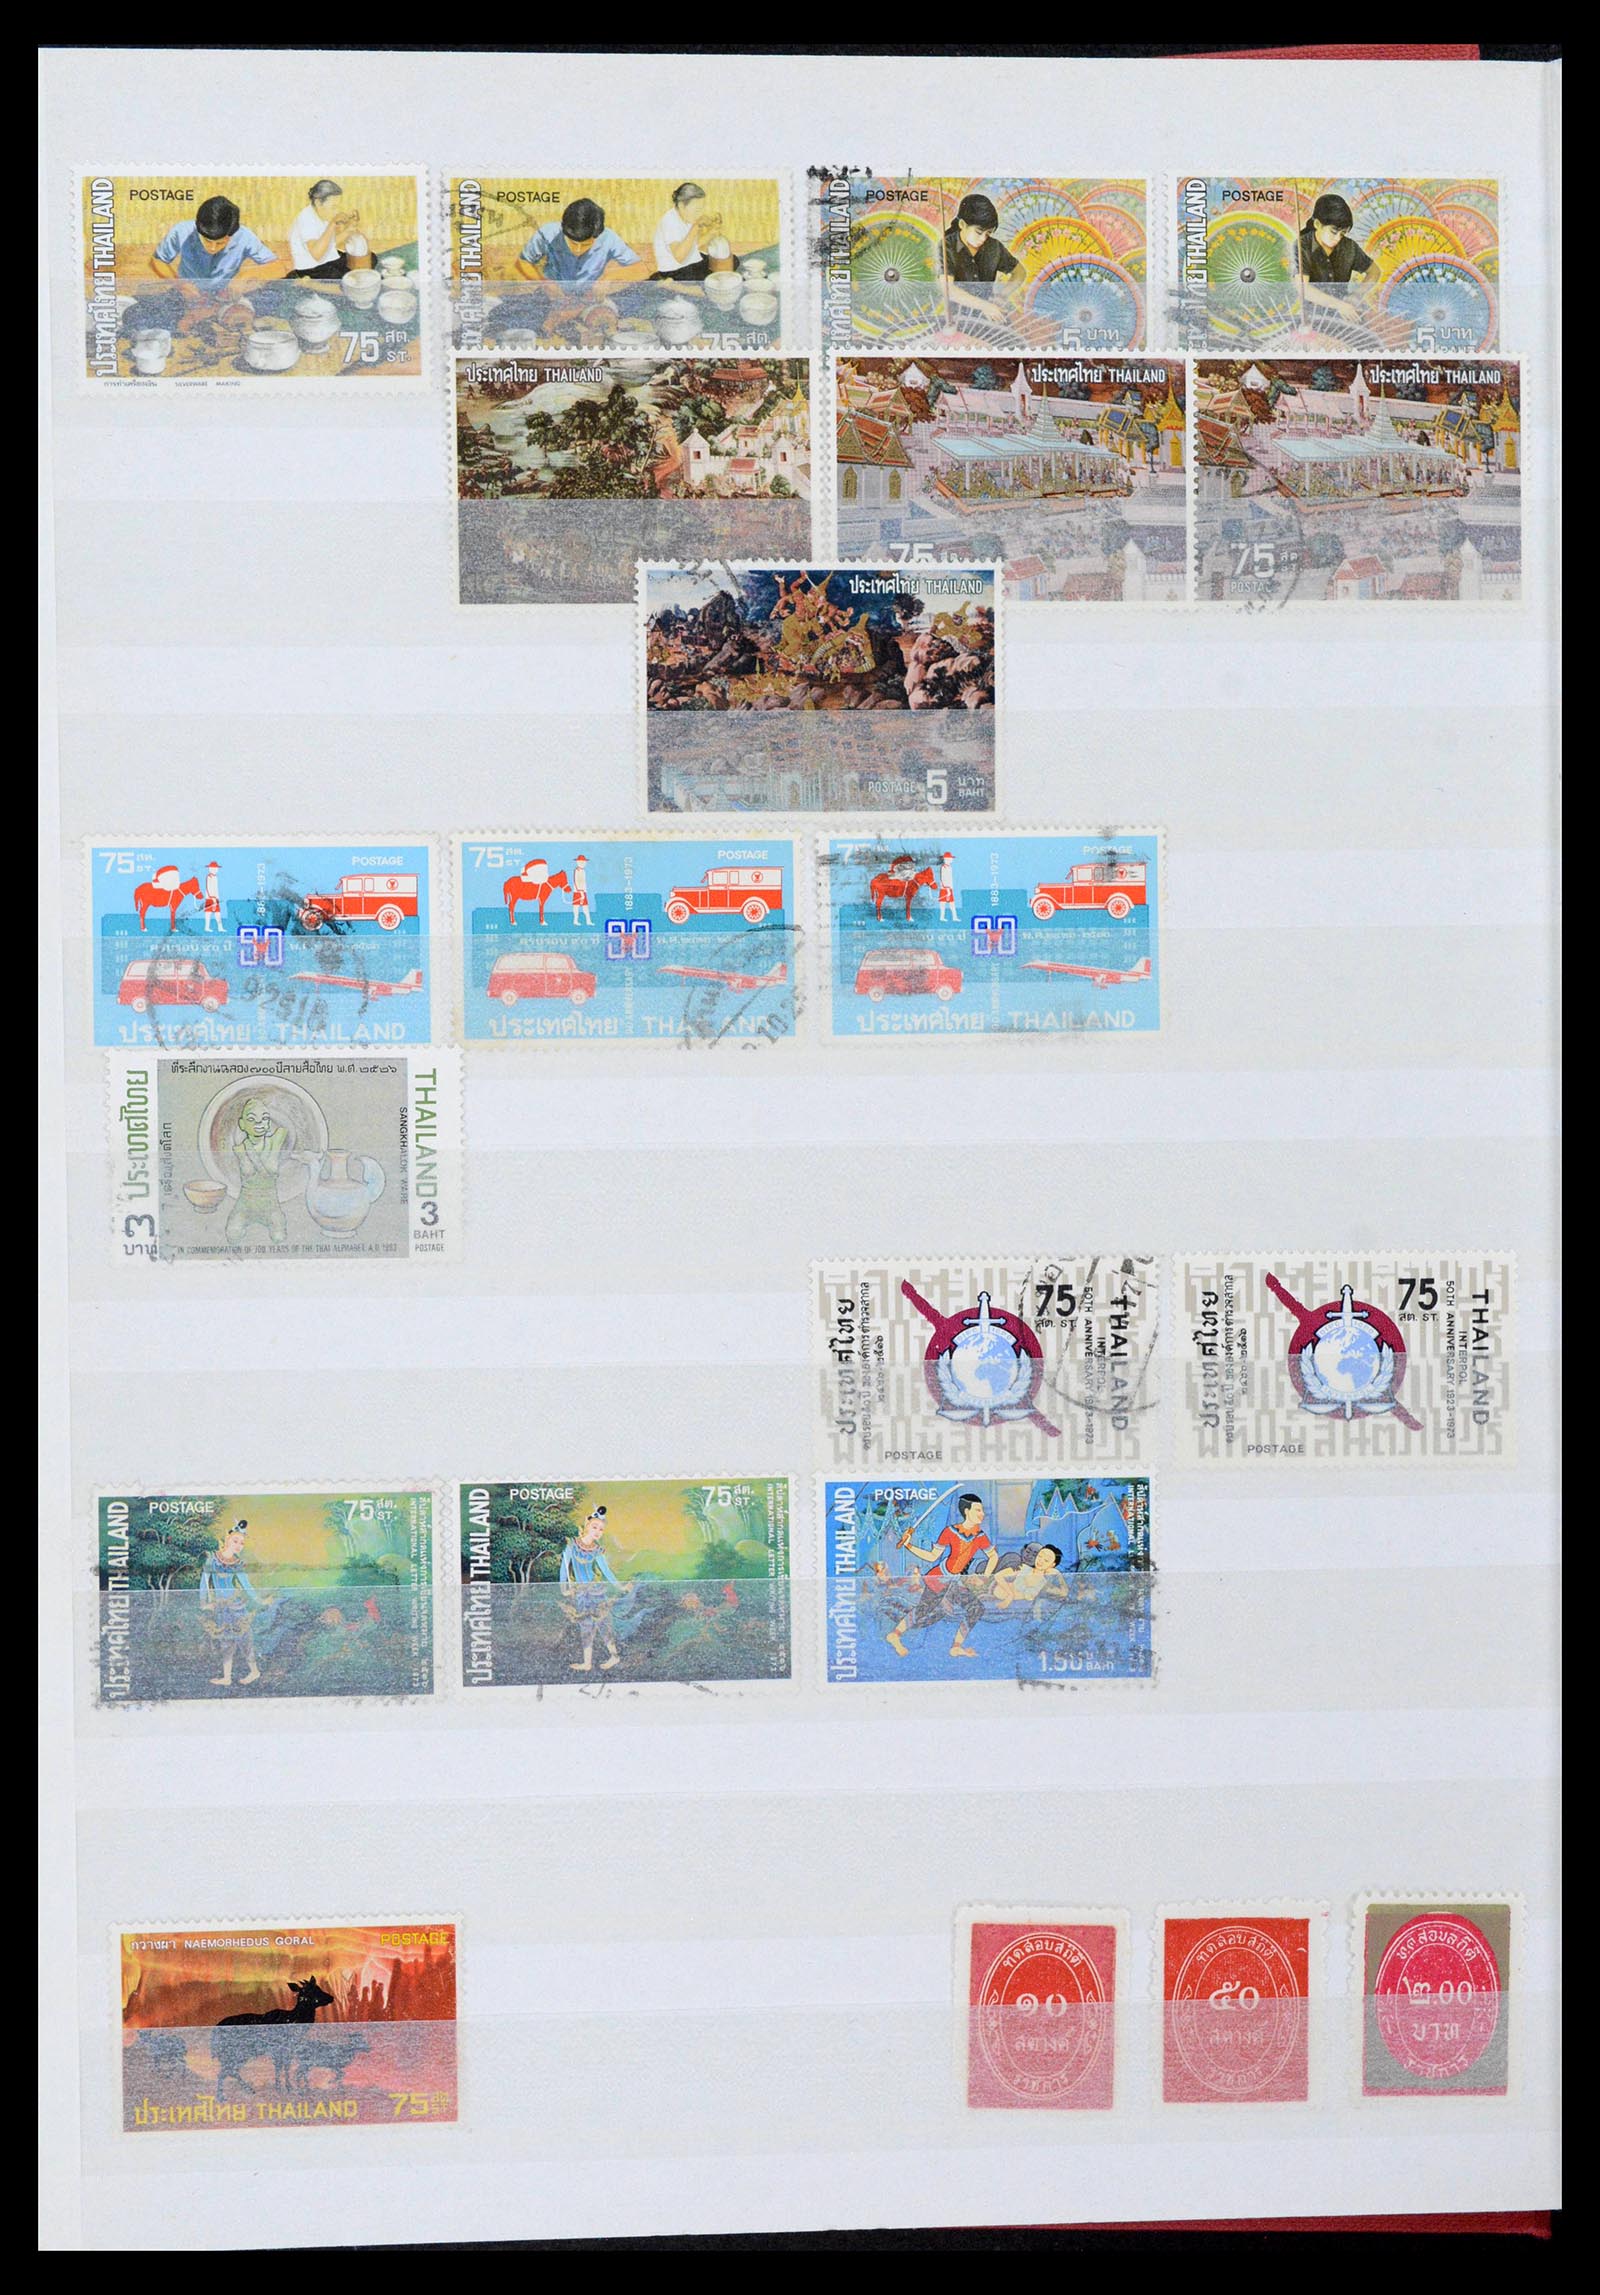 39384 0036 - Stamp collection 39384 Thailand 1883-2014.